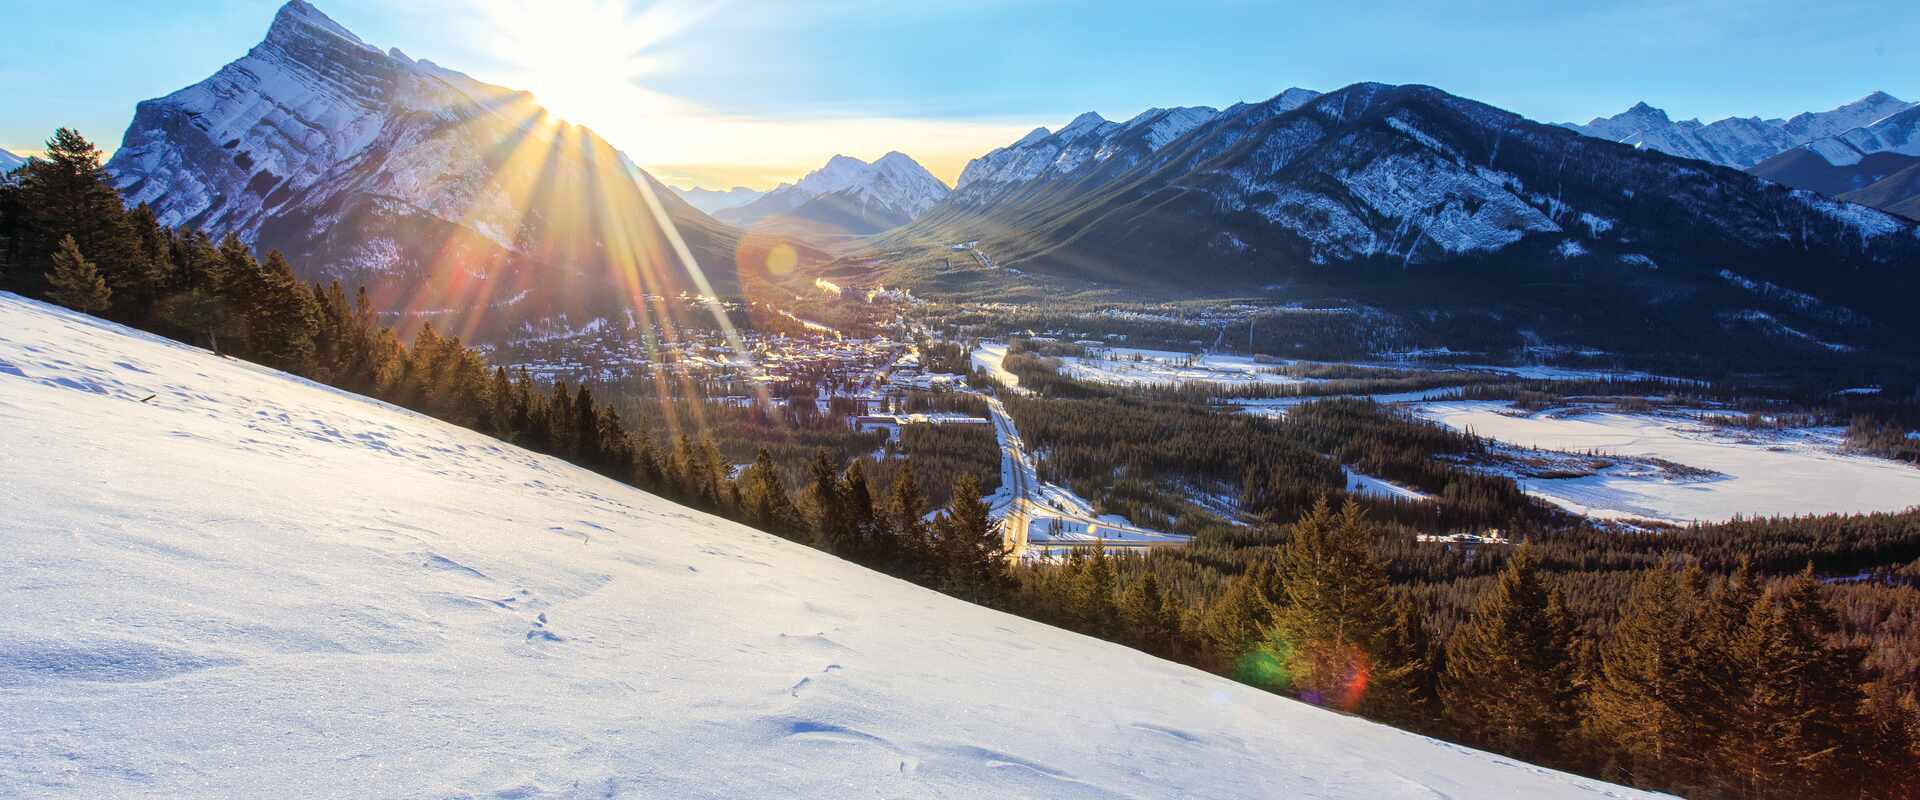 View of sunrise over snow covered ground and mountains, Canada